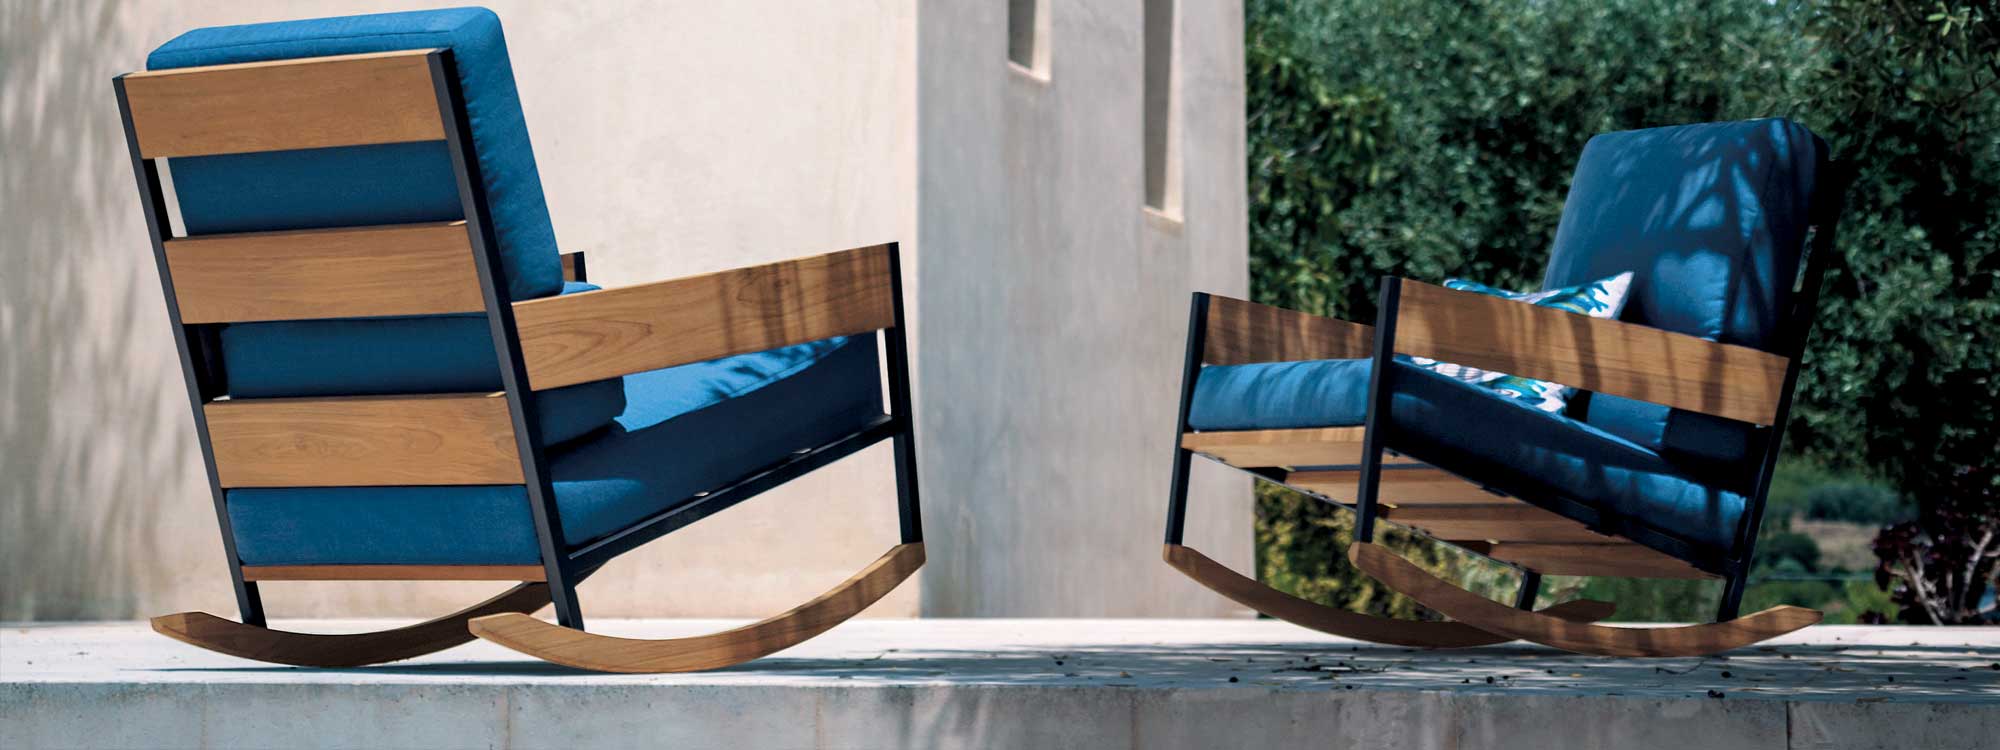 Image of pair of RODA Nap modern outdoor rocking chairs and Root side table, in sun and shade on poured concrete terrace